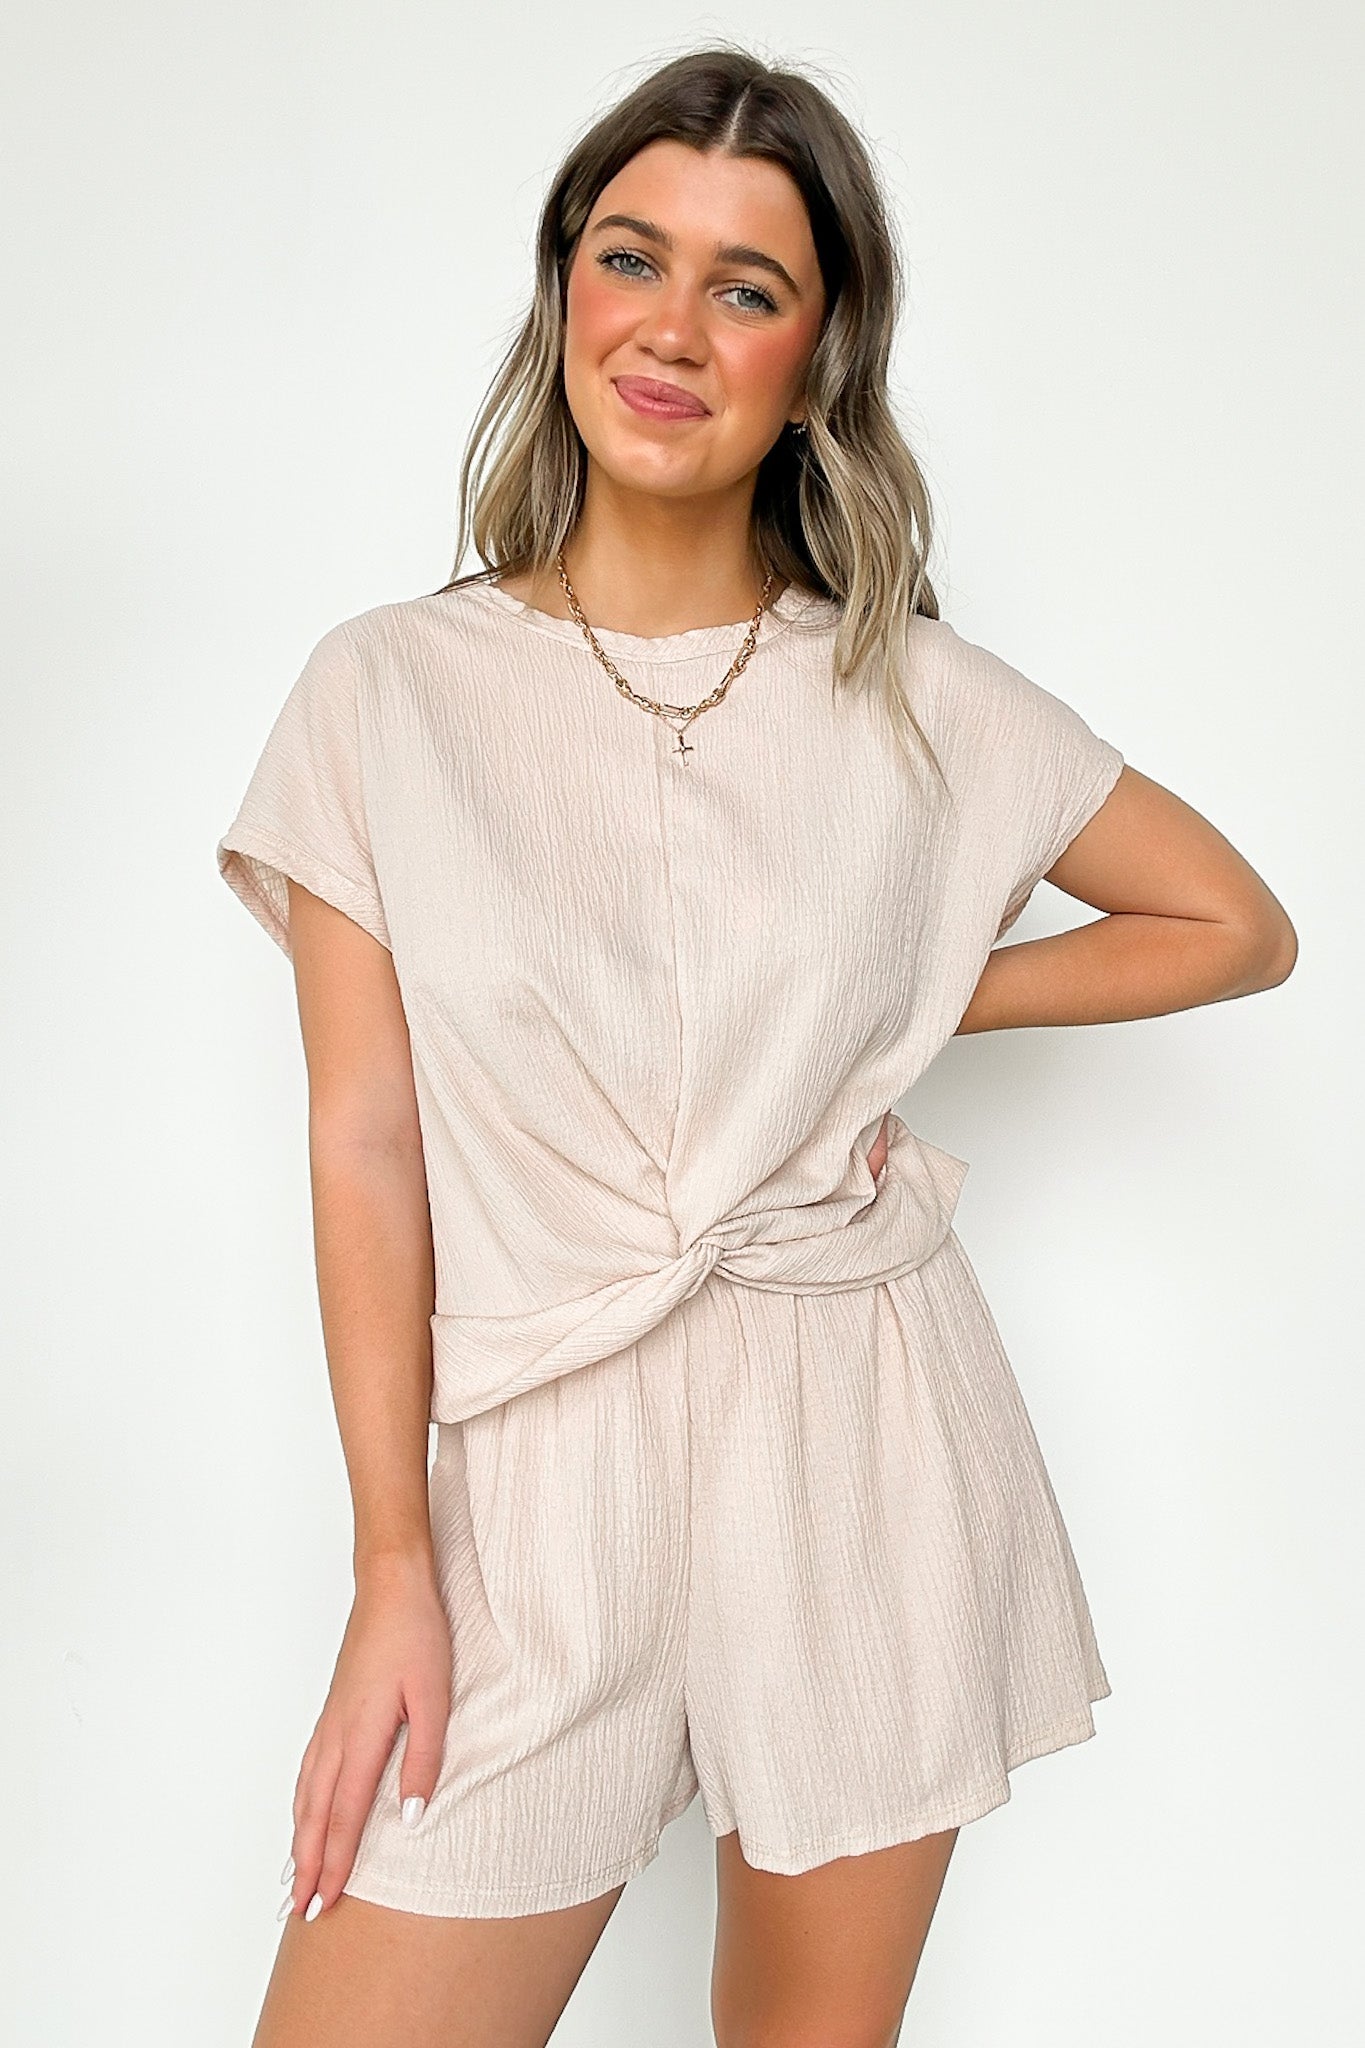  Tasiah Twist Front Short Sleeve Top and Shorts Set - Madison and Mallory